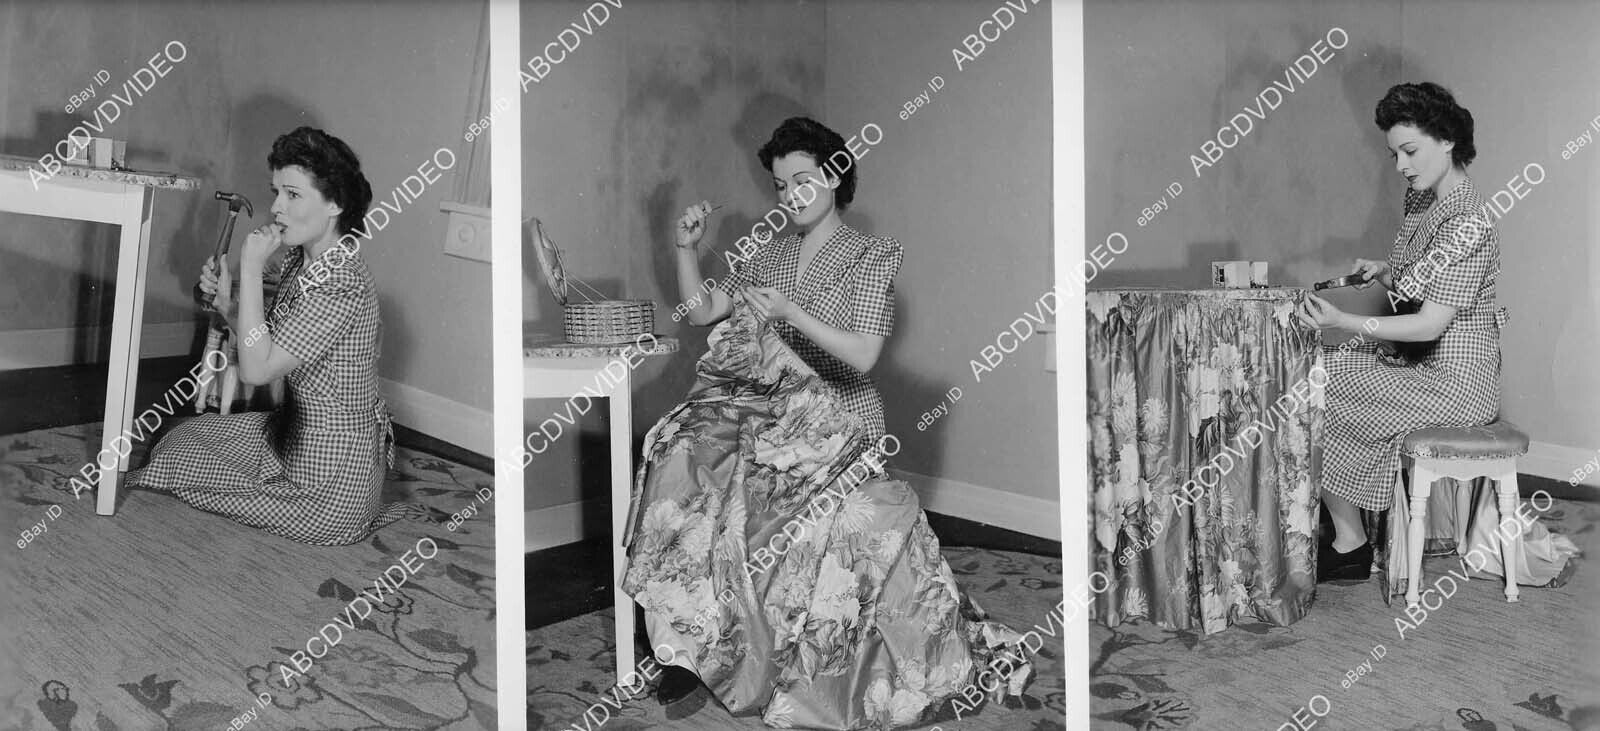 crp-577 1944 Ruth Hussey busy sequence doing some home repairs herself crp-577